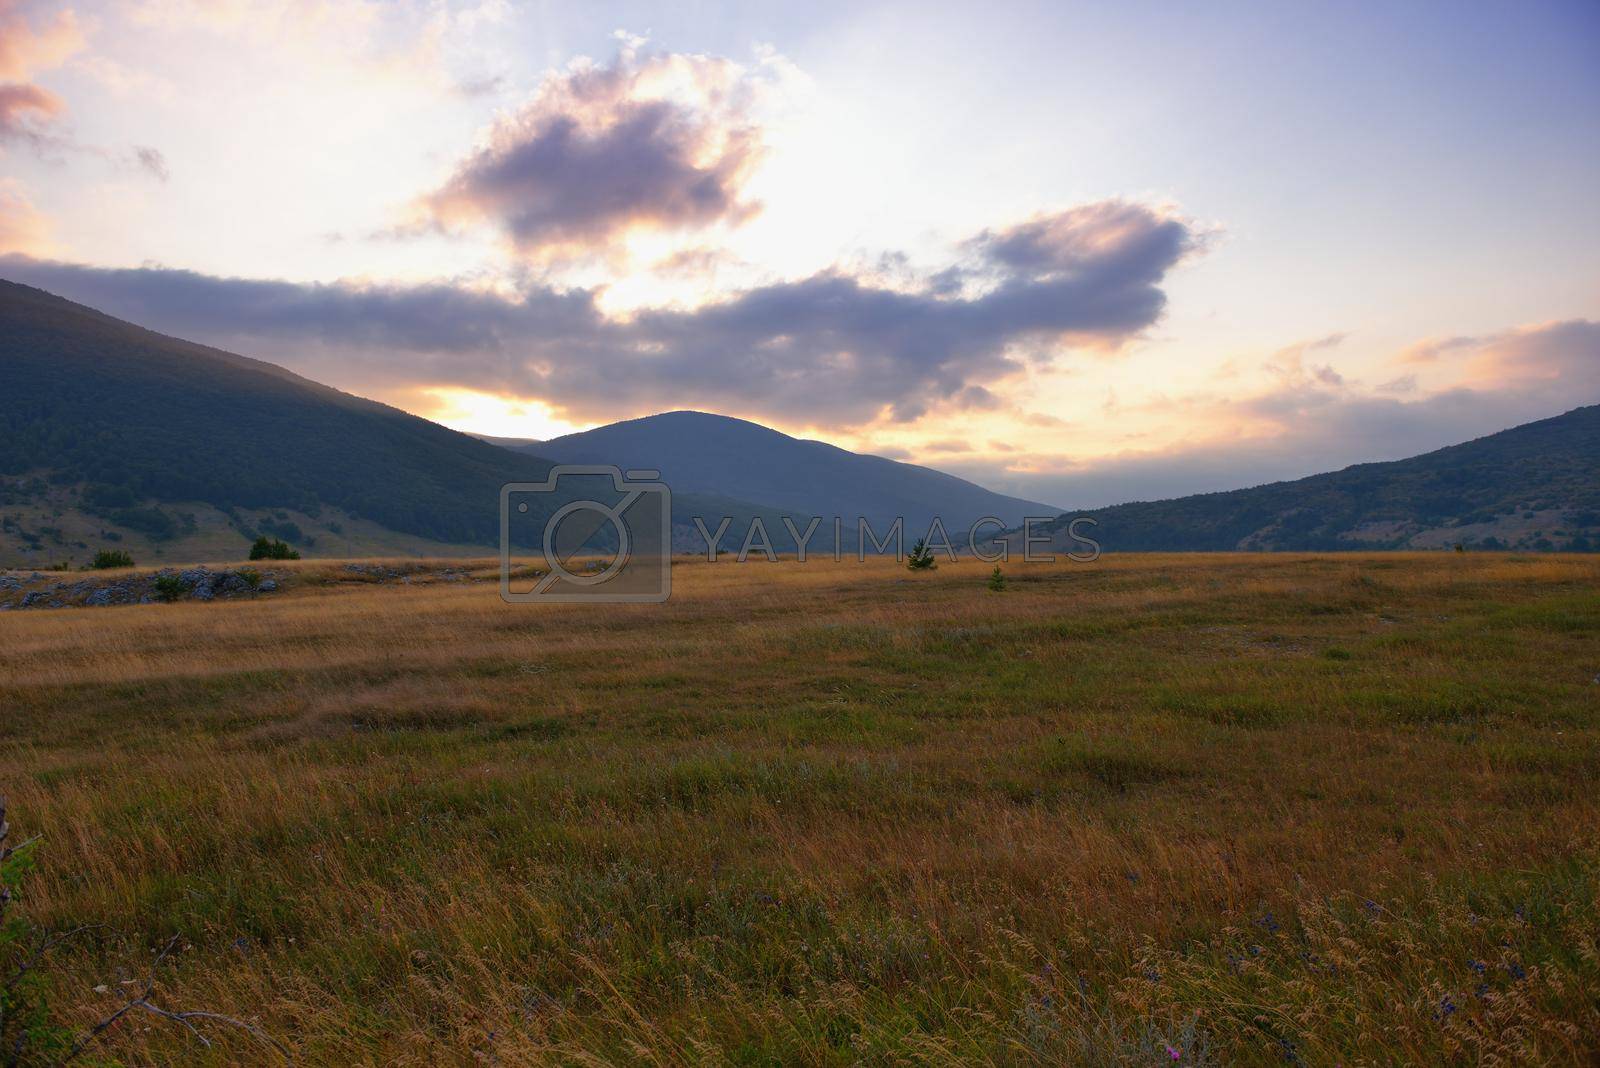 landscape with a traditional hay field full of wild flowers and grasses surrounded by trees under a cloudy summer sky